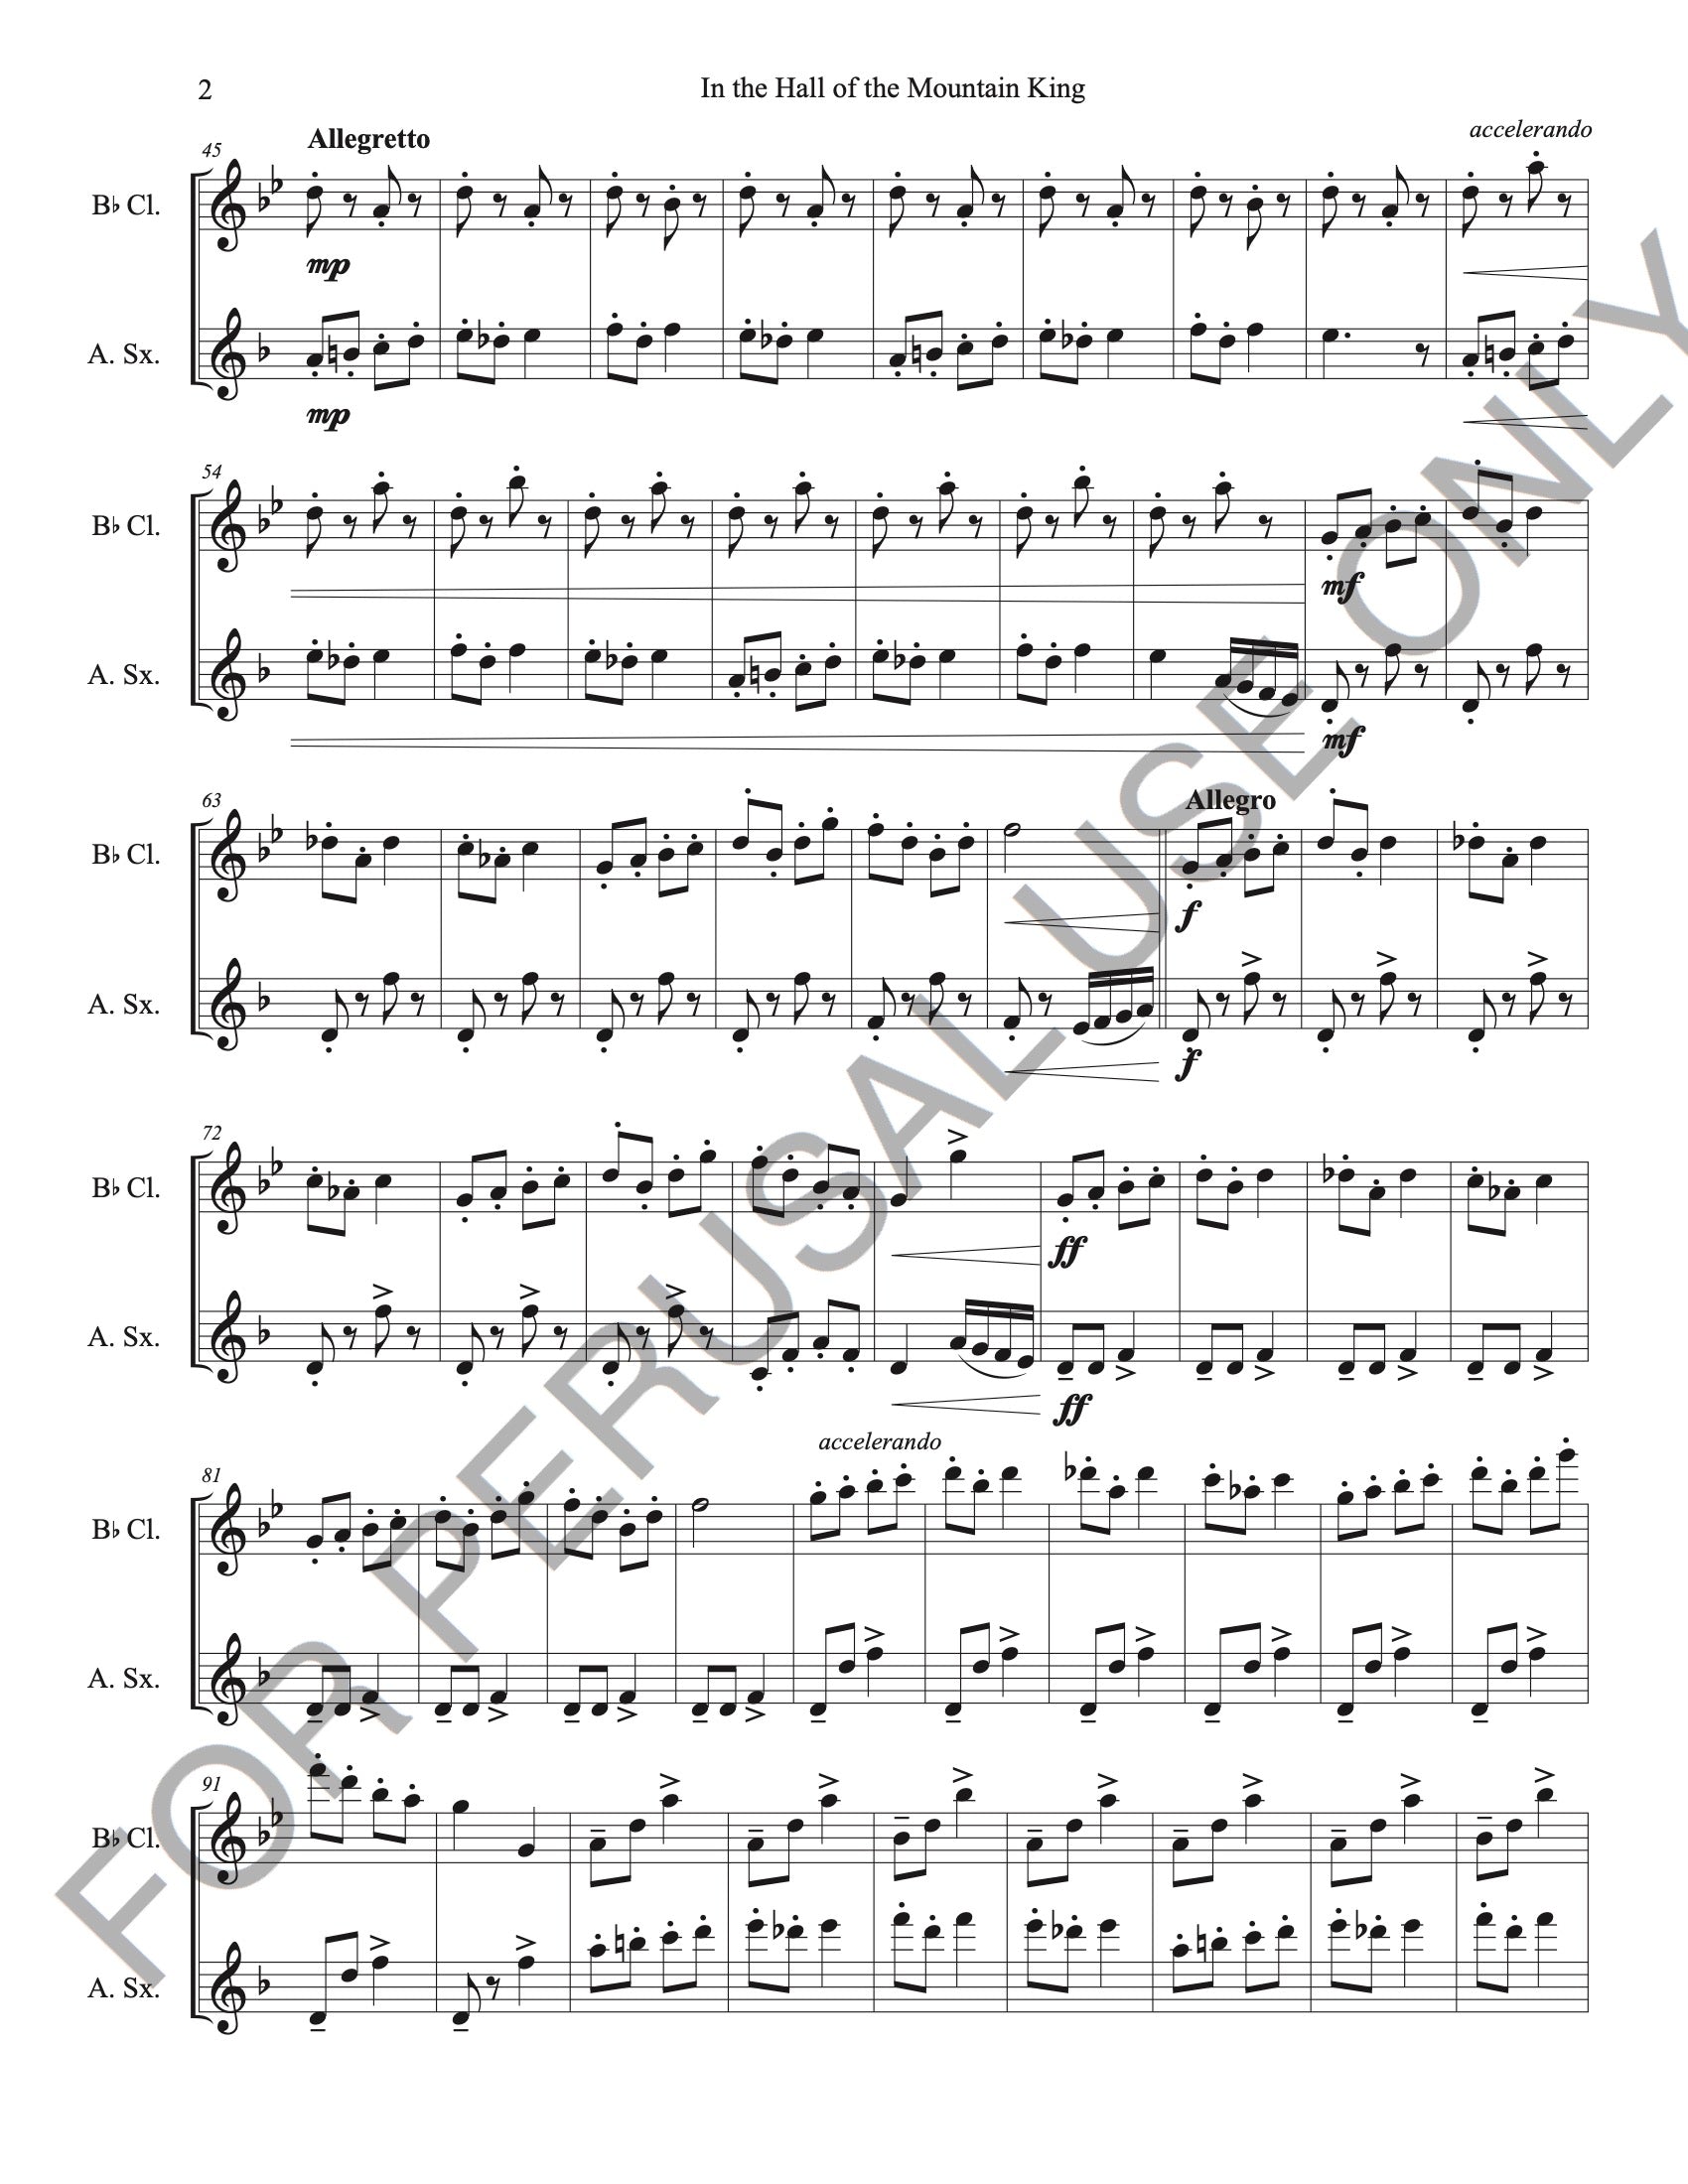 Clarinet and Saxophone Duet sheet music: In the Hall of the Mountain King